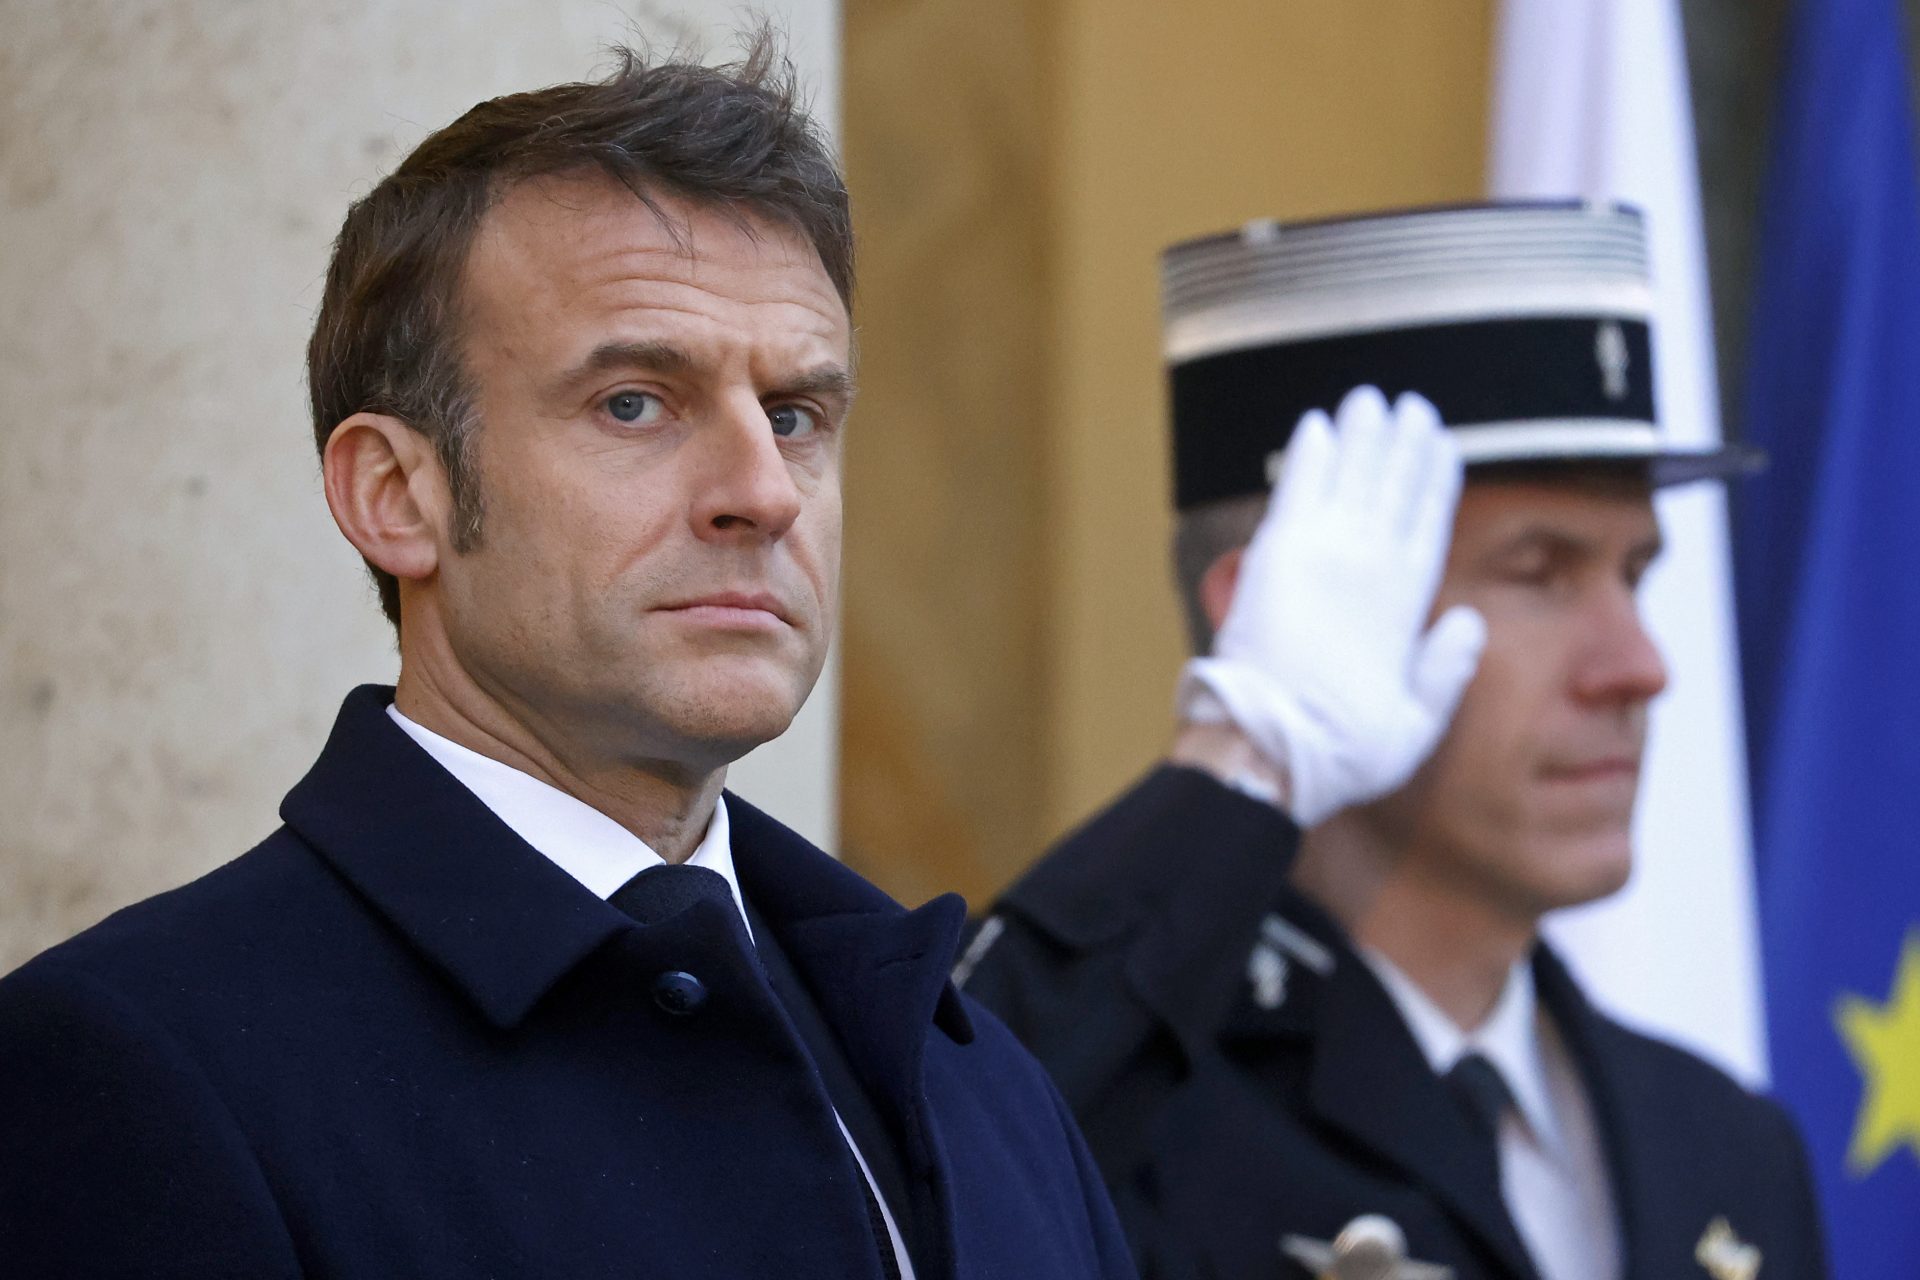 Macron even considered sending French troops to Ukraine